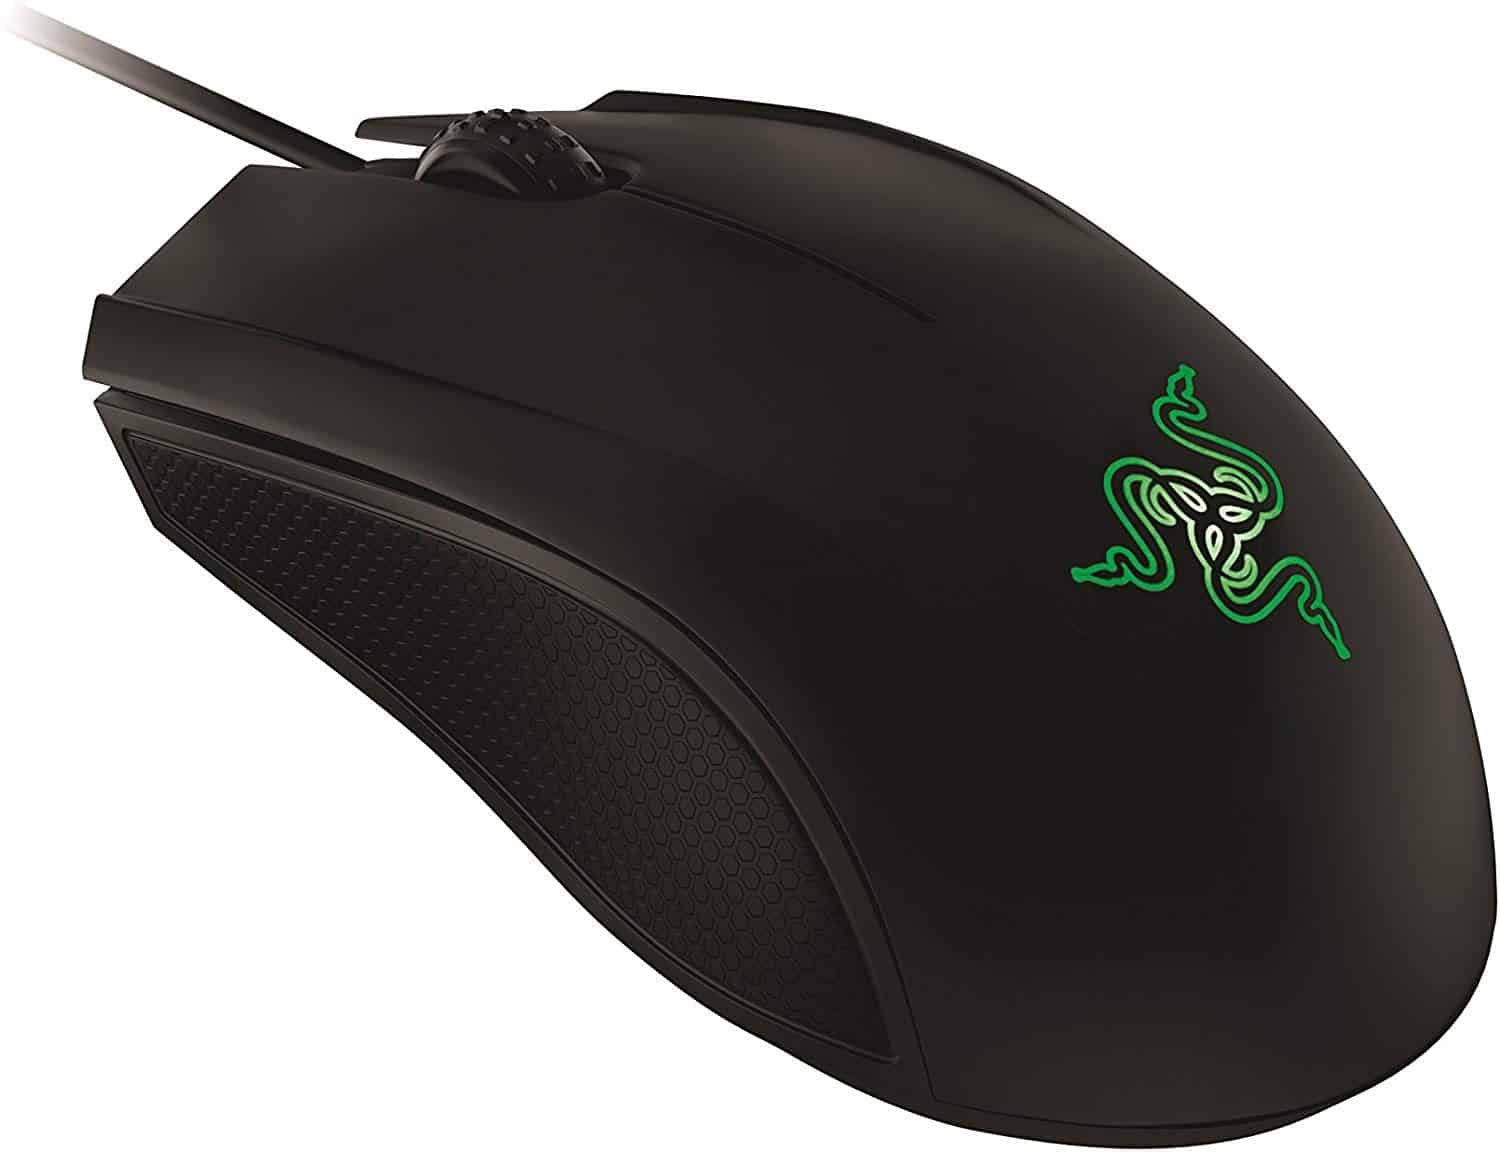 Best Gaming mouse under rs 2000